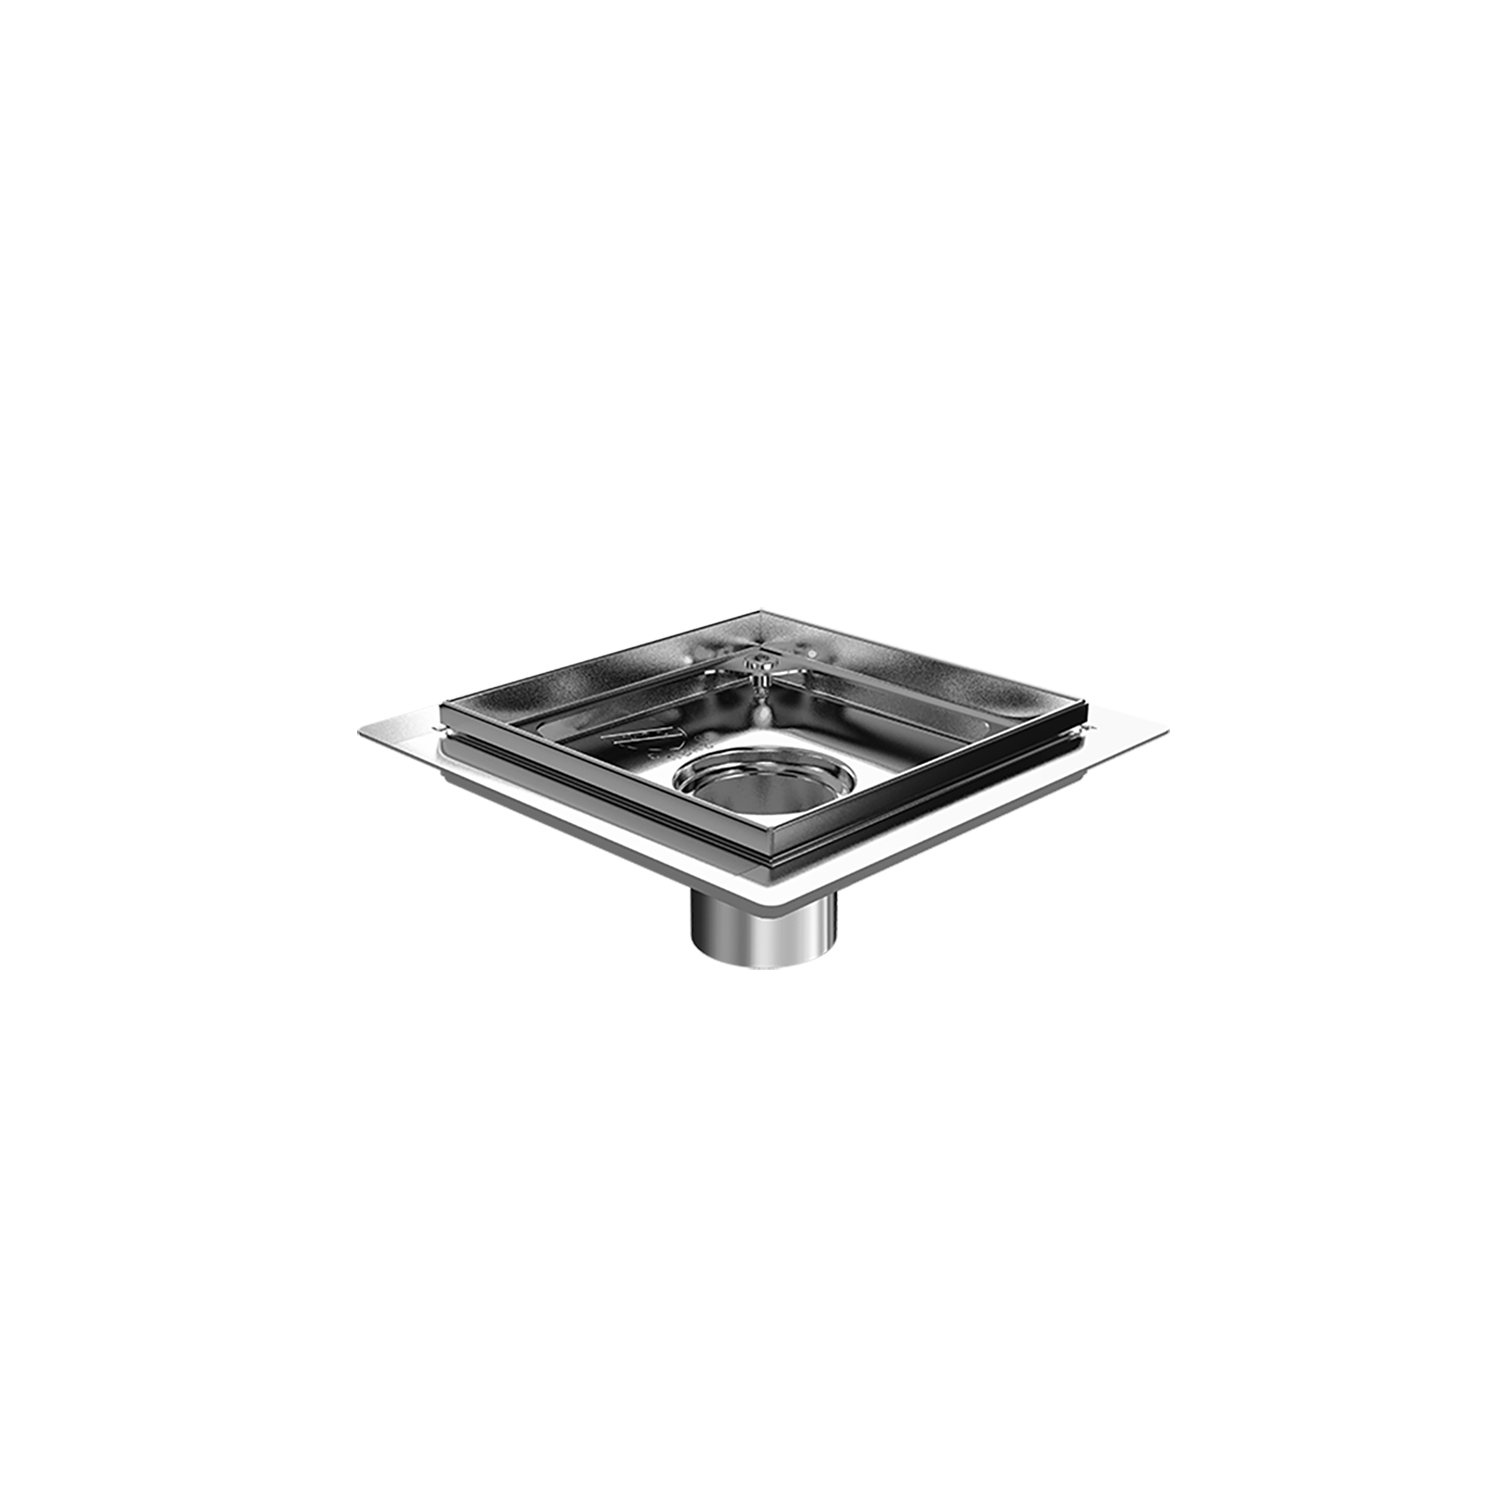 Square stainless steel grutter rough-in 6